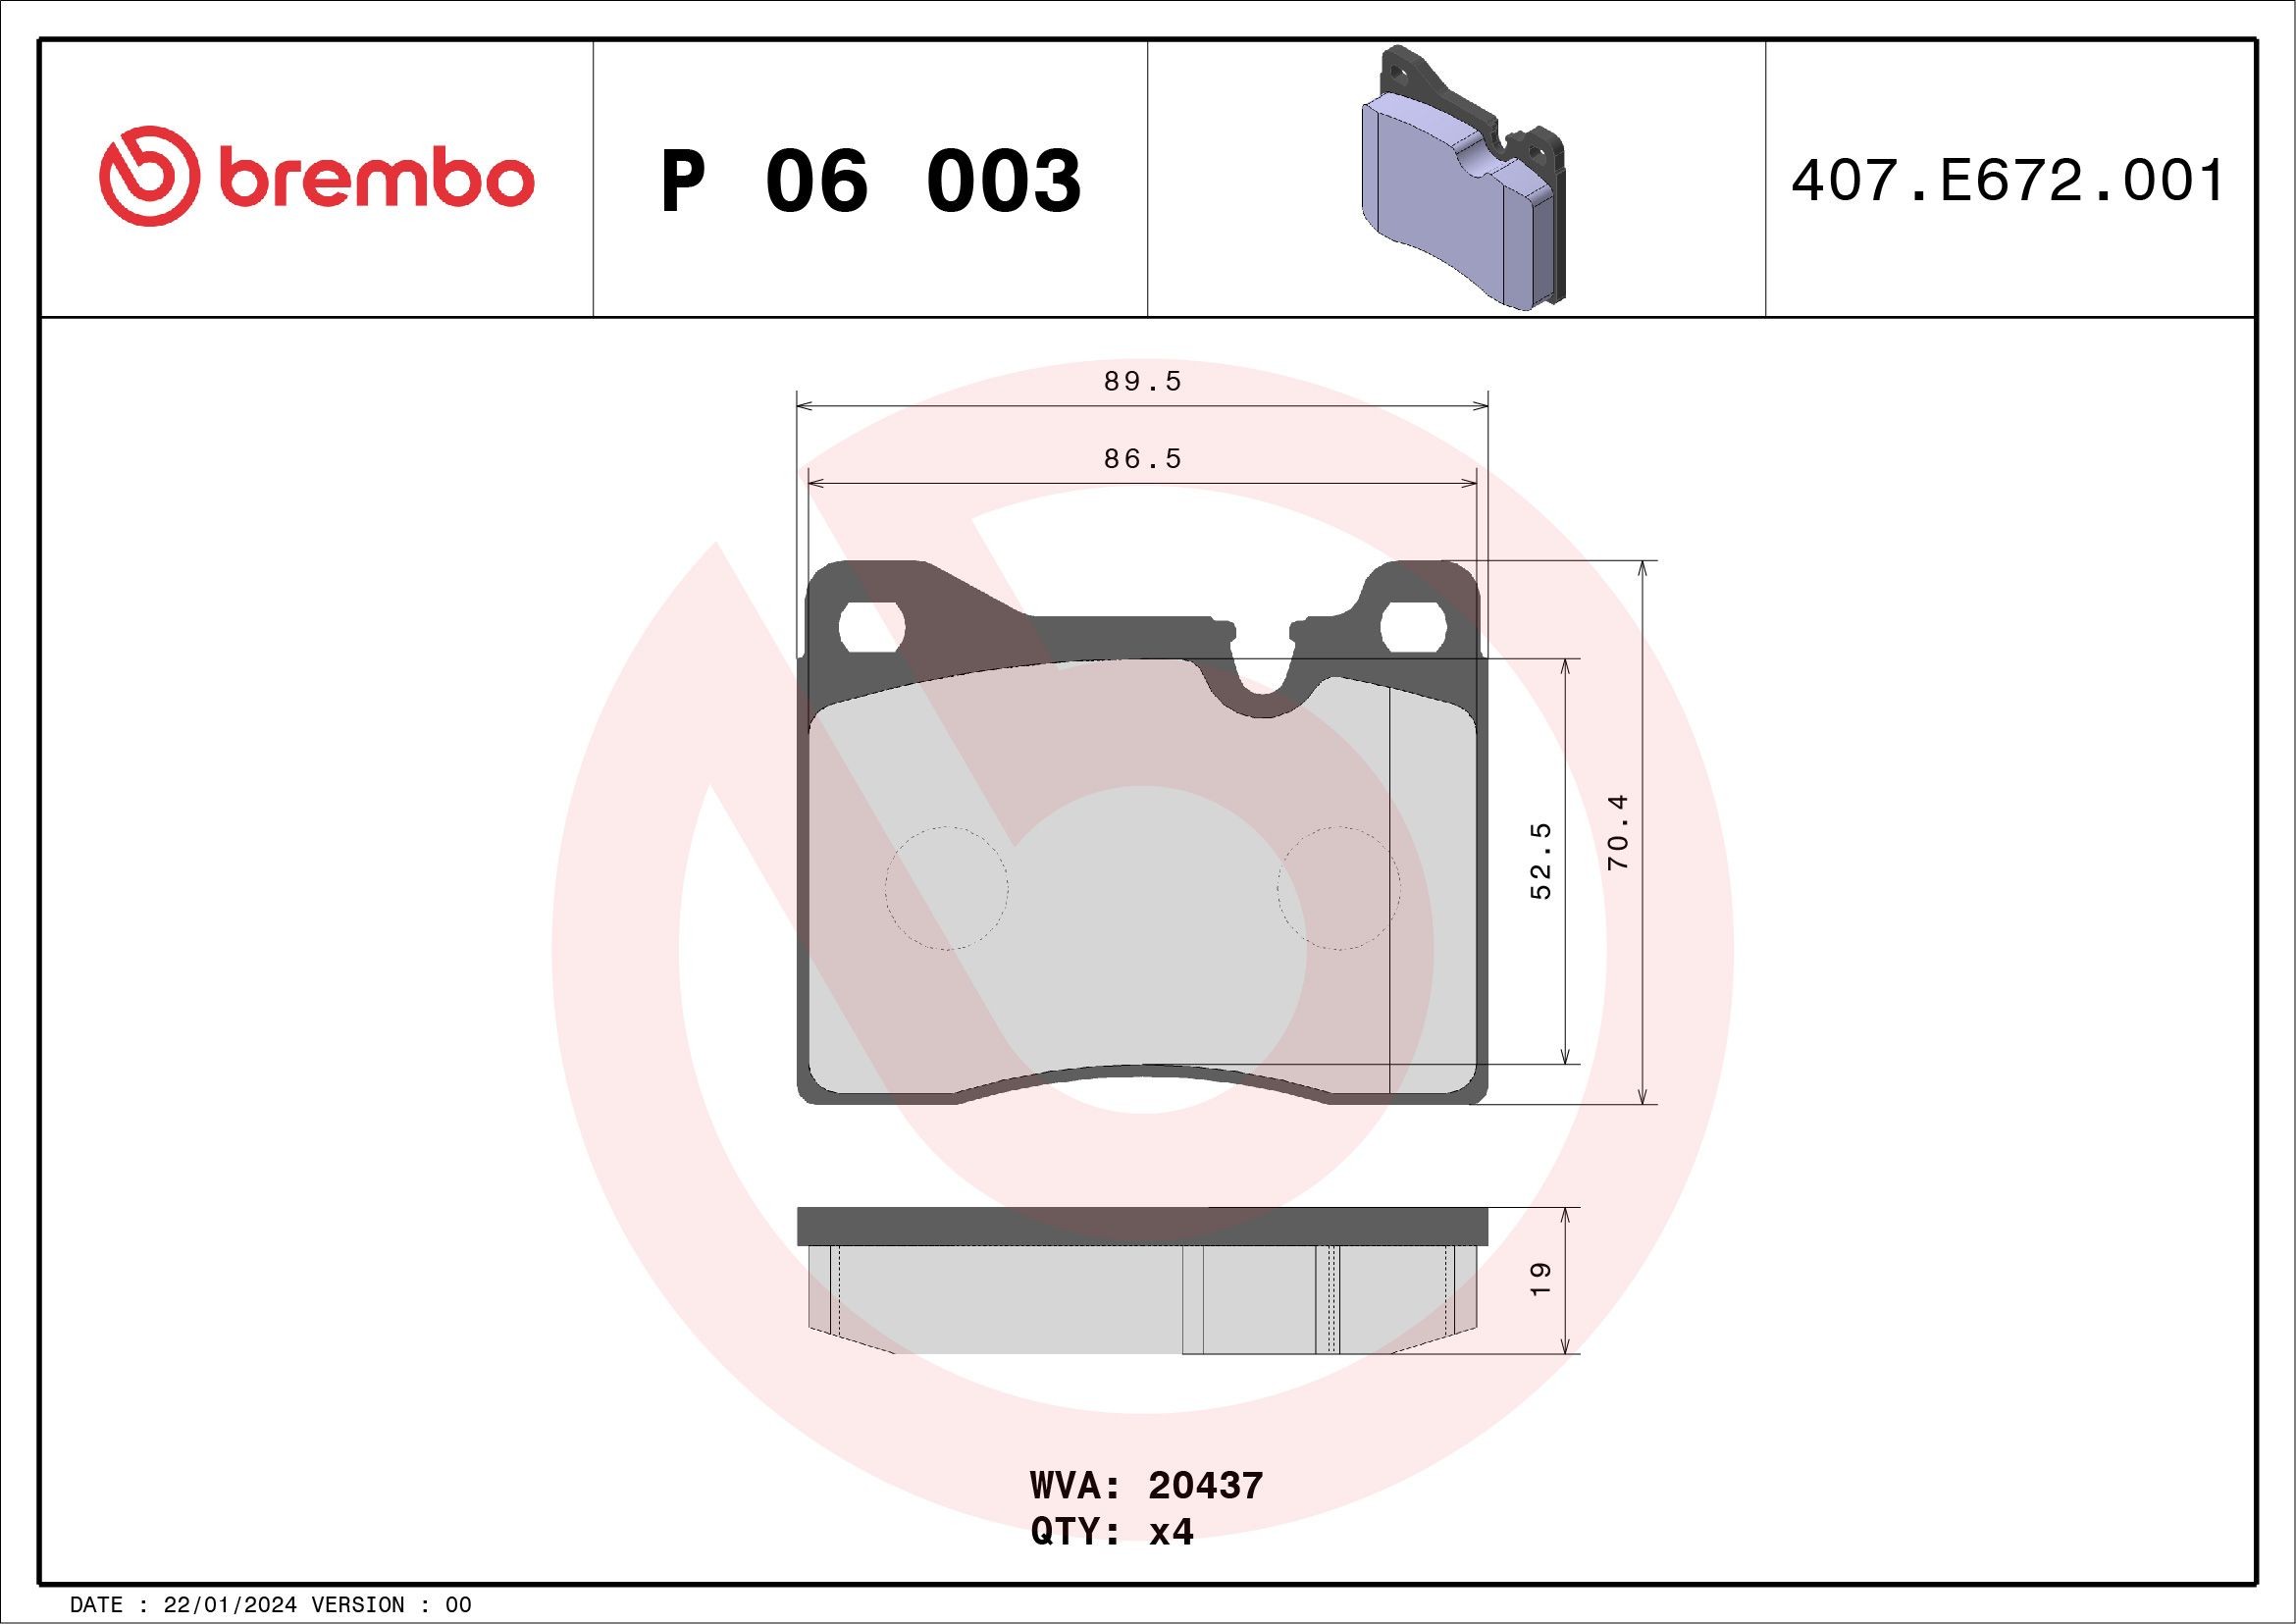 BREMBO P 06 003 Brake pad set prepared for wear indicator, without accessories